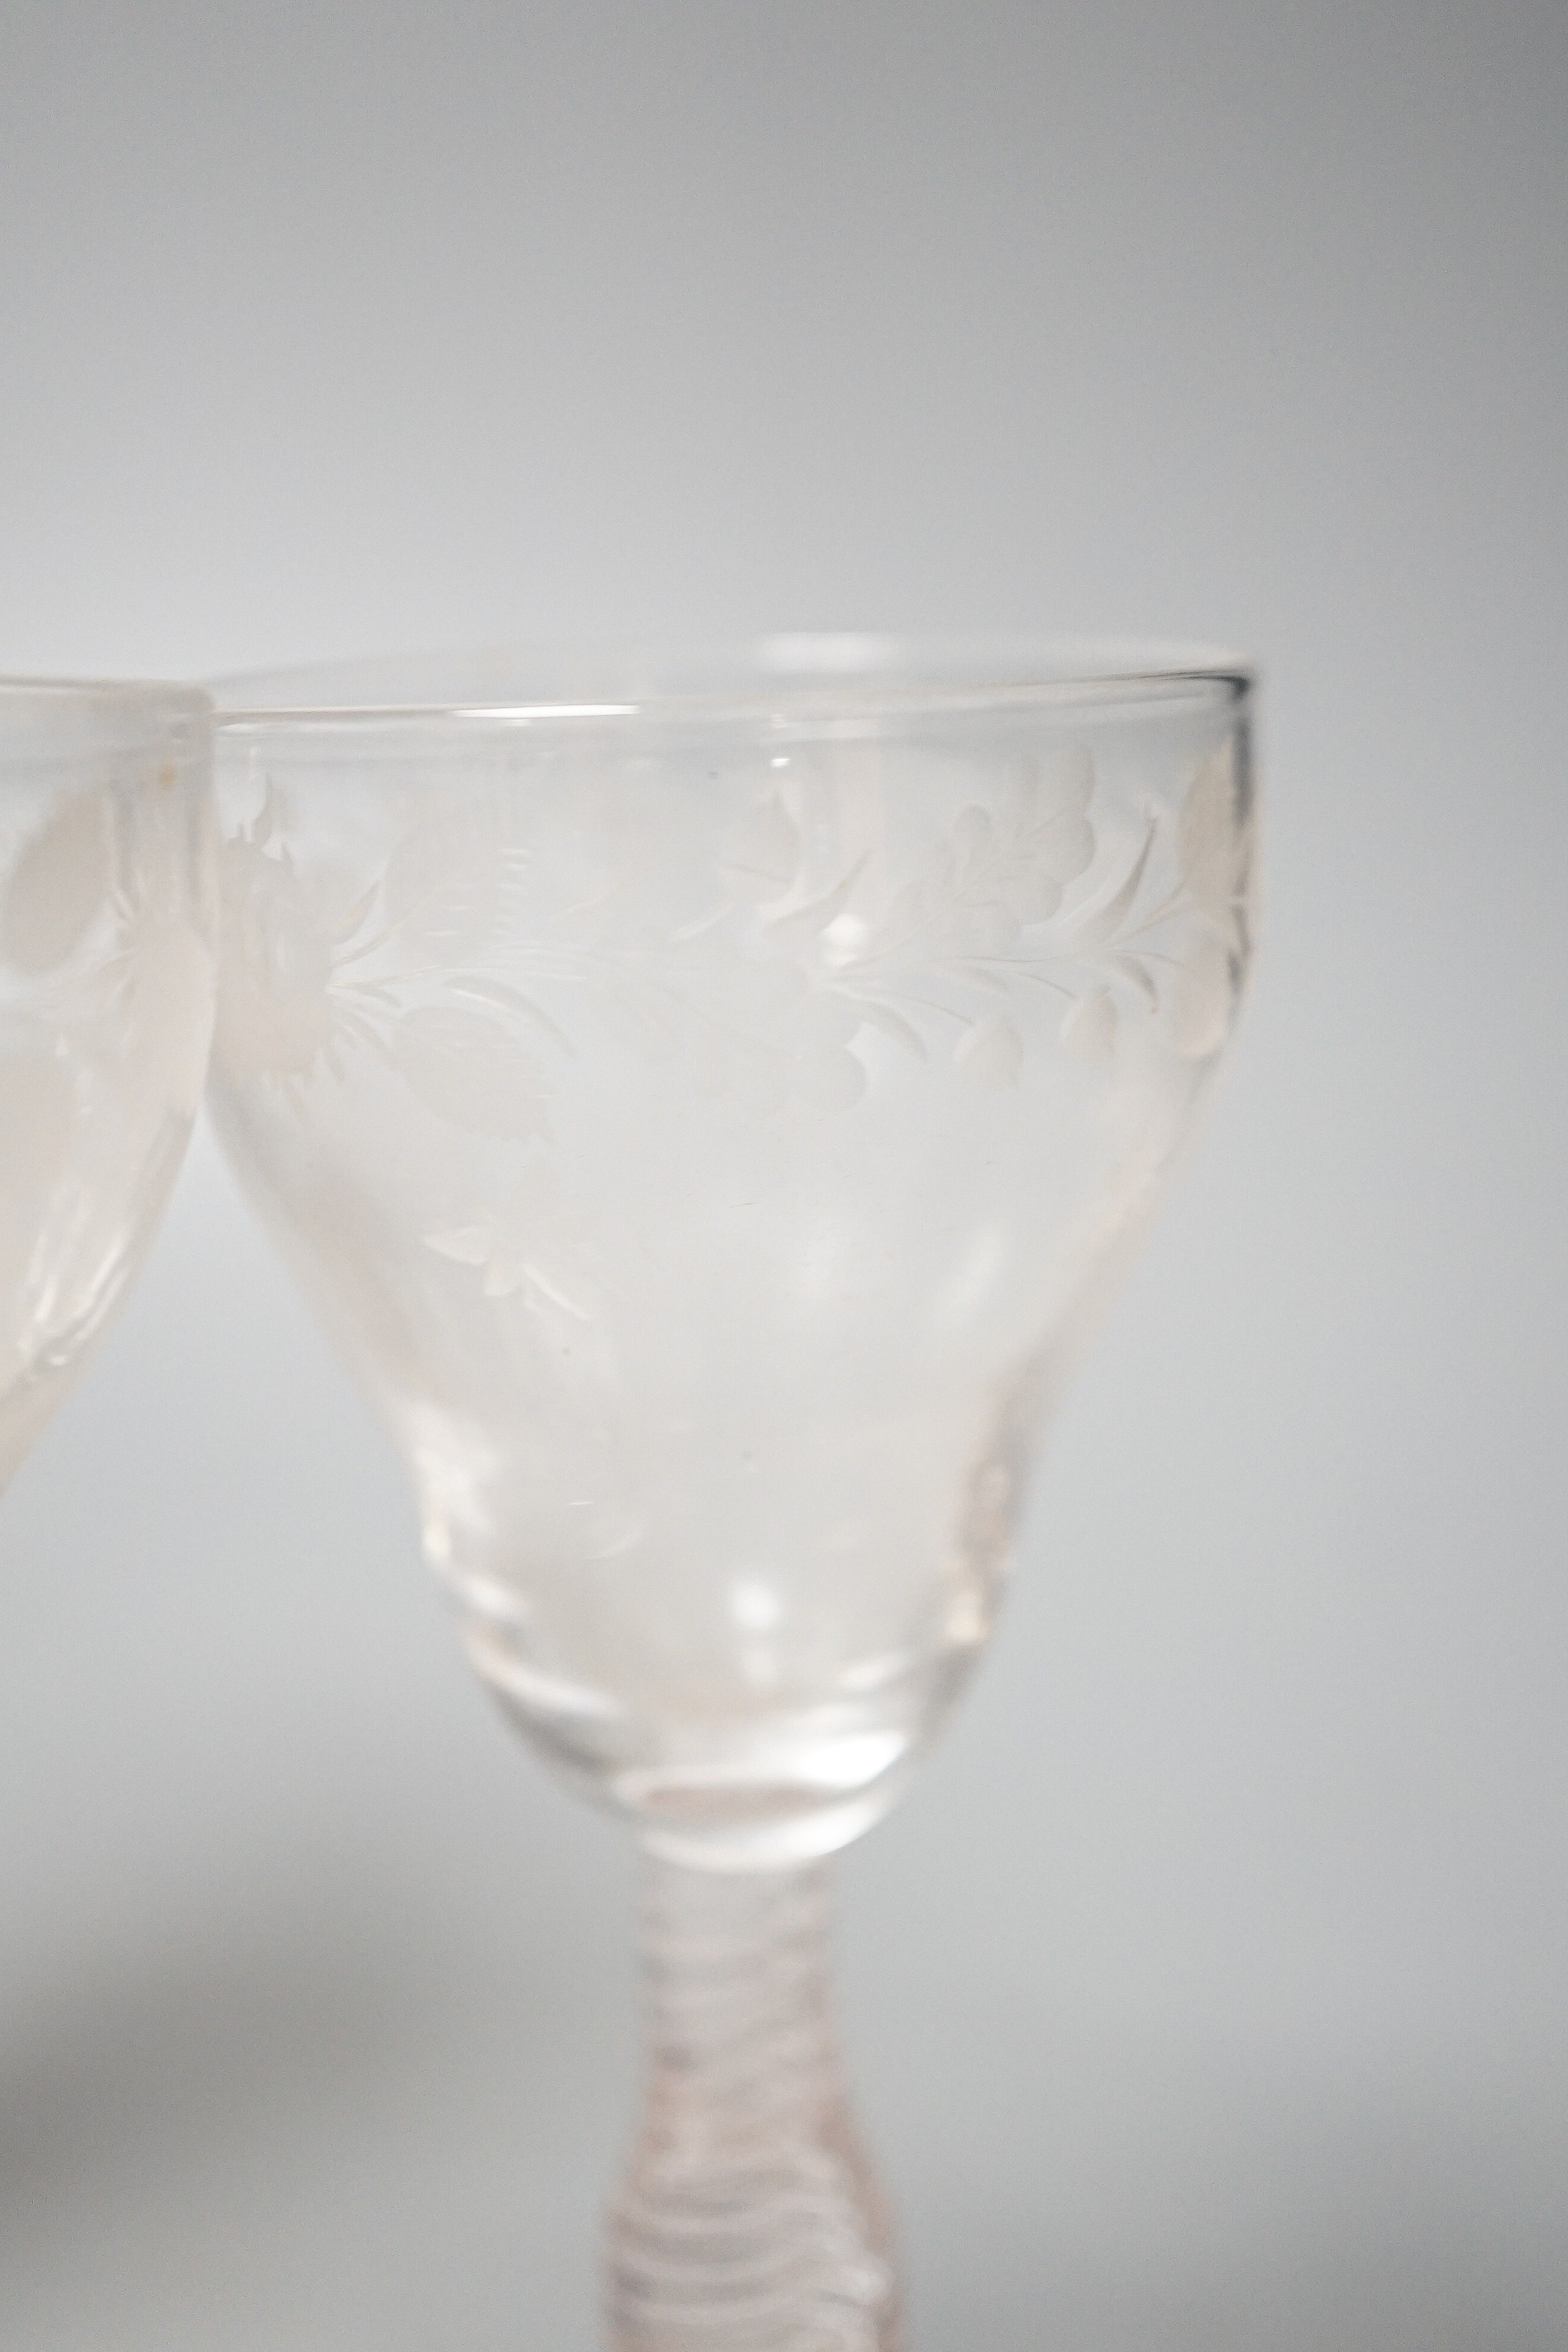 A pair of opaque twist cordial glasses with floral engraved bowls, 14cm and sundry glassware